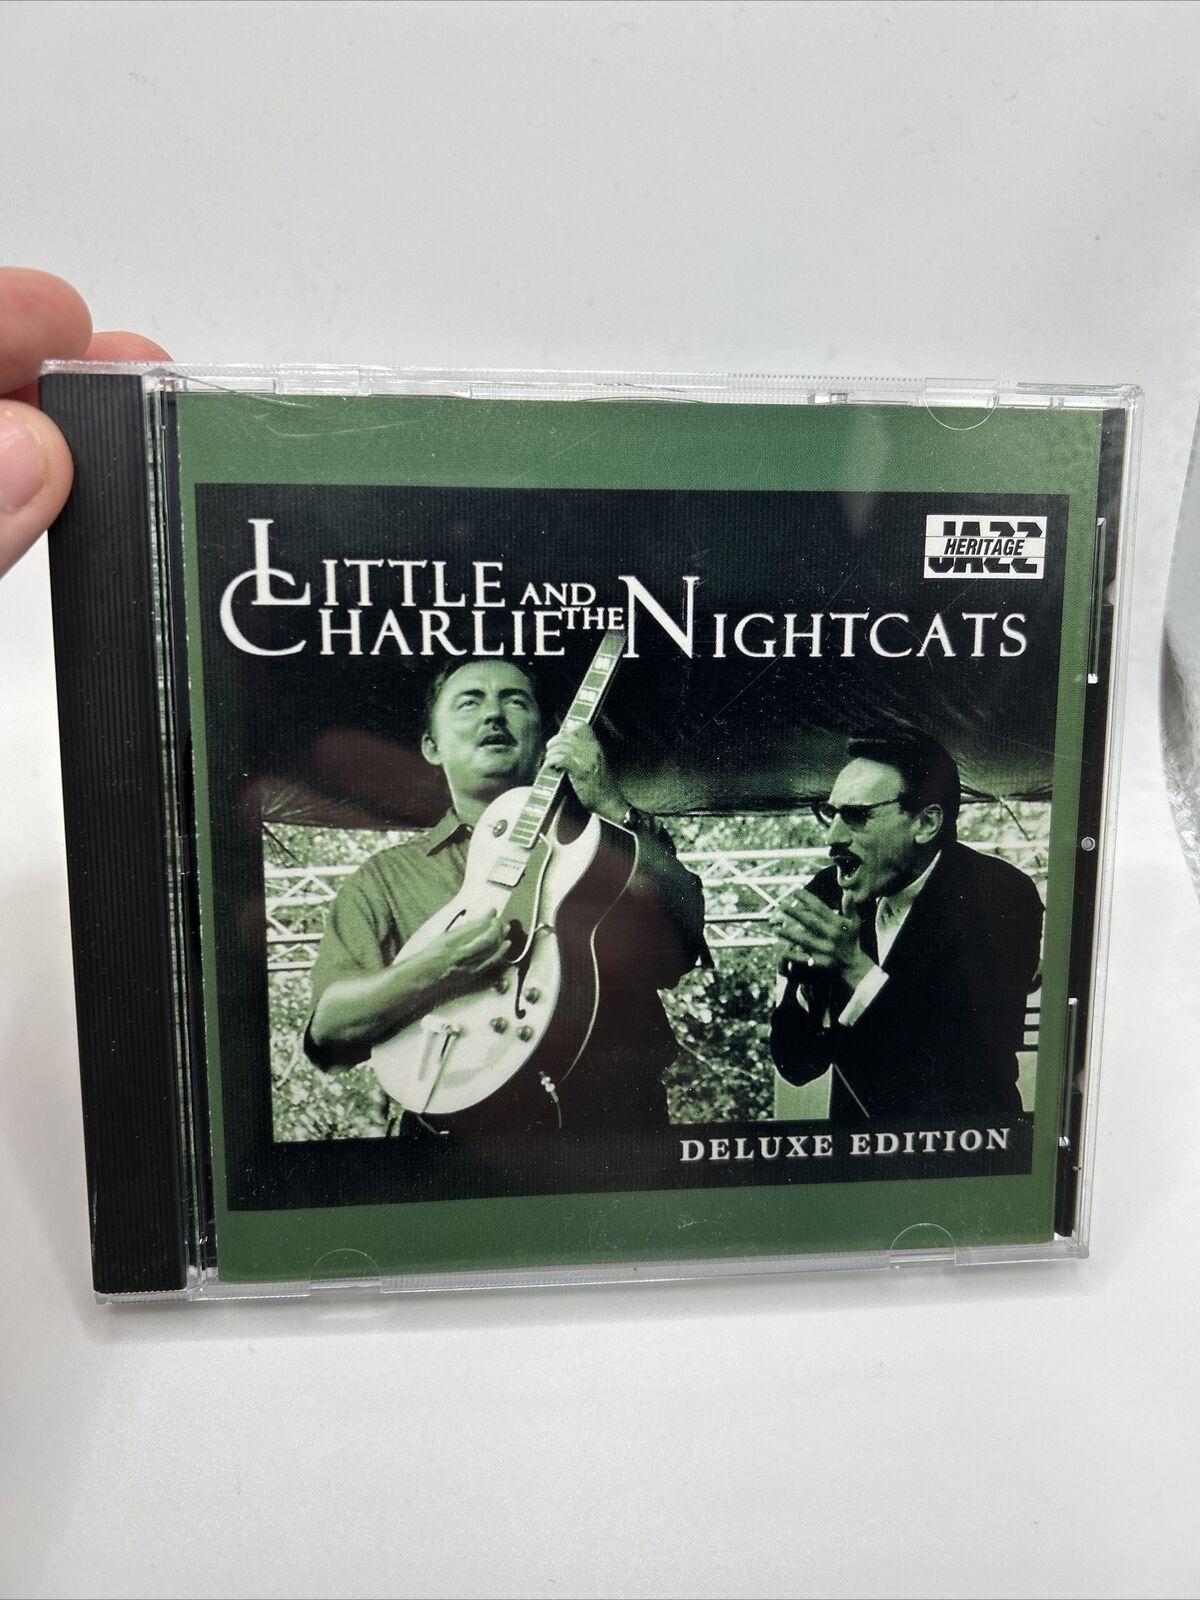 Little Charlie And The Nightcats - Deluxe Edition [CD]